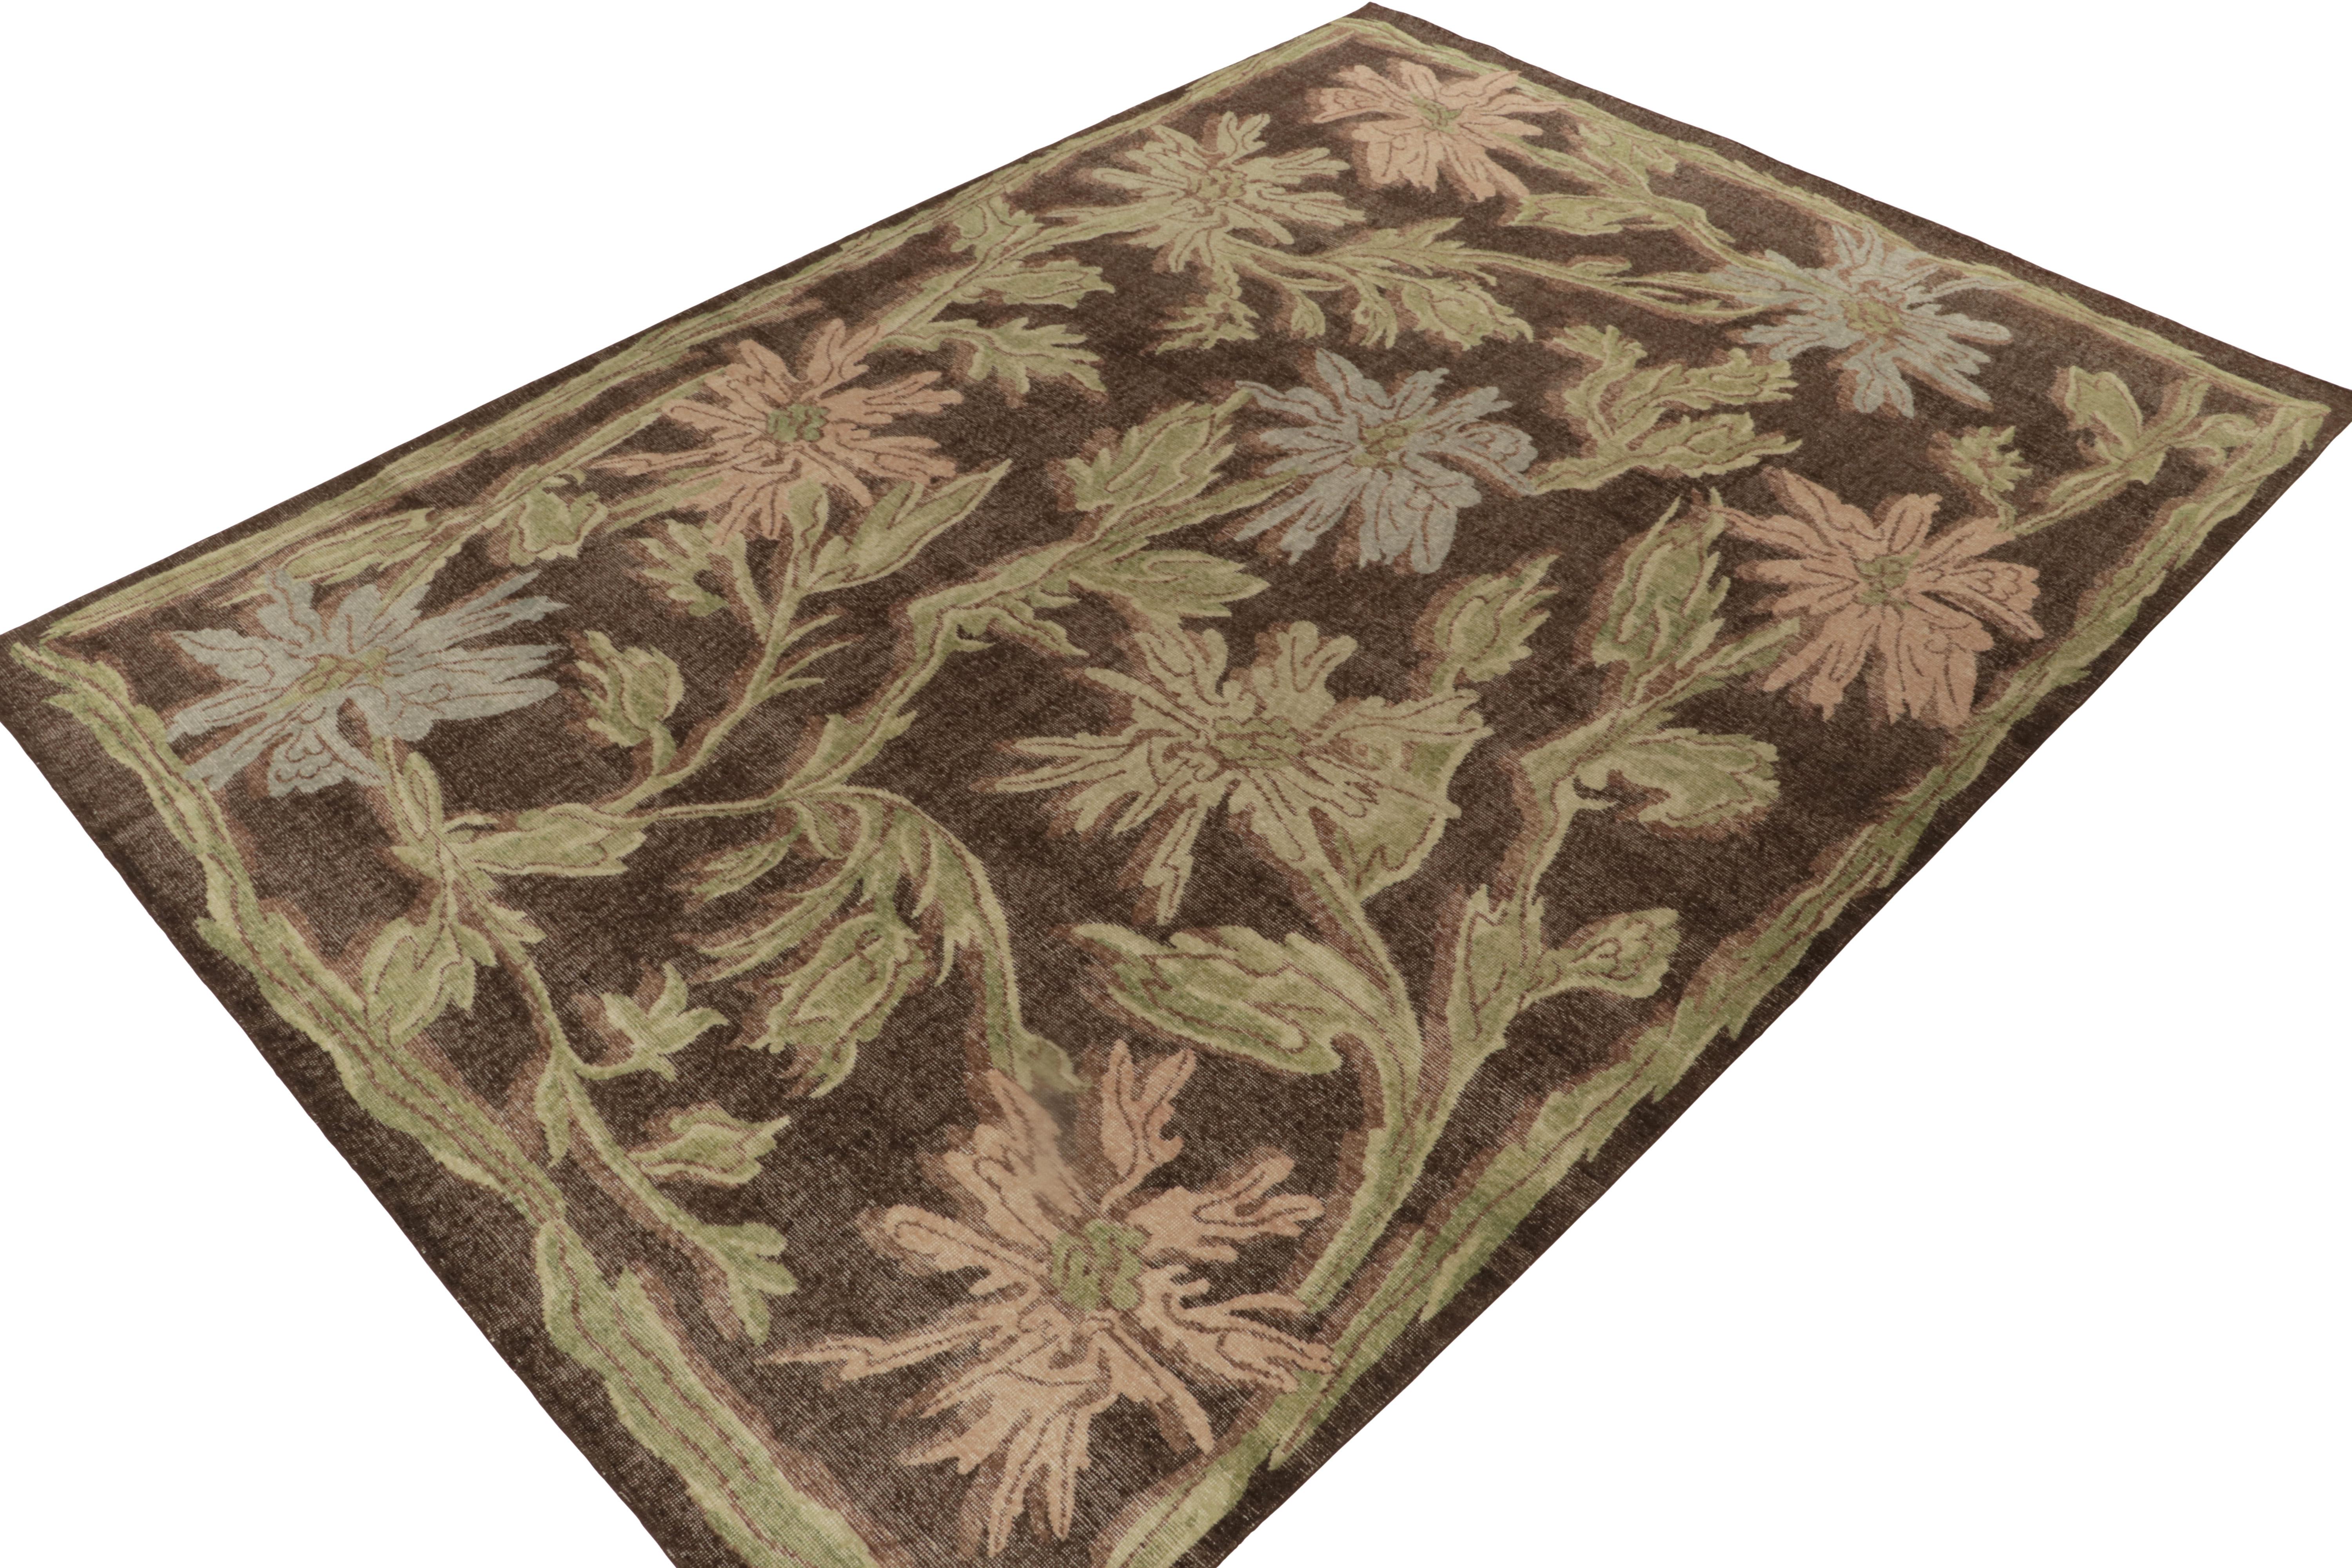 From Rug & Kilim’s Homage Collection, a 10x14 hand-knotted wool rug recapturing whimsical botanical designs in a delicious new texture. 

On the Design: This contemporary piece enjoys a play of chocolate brown & green with pink & blue accents in